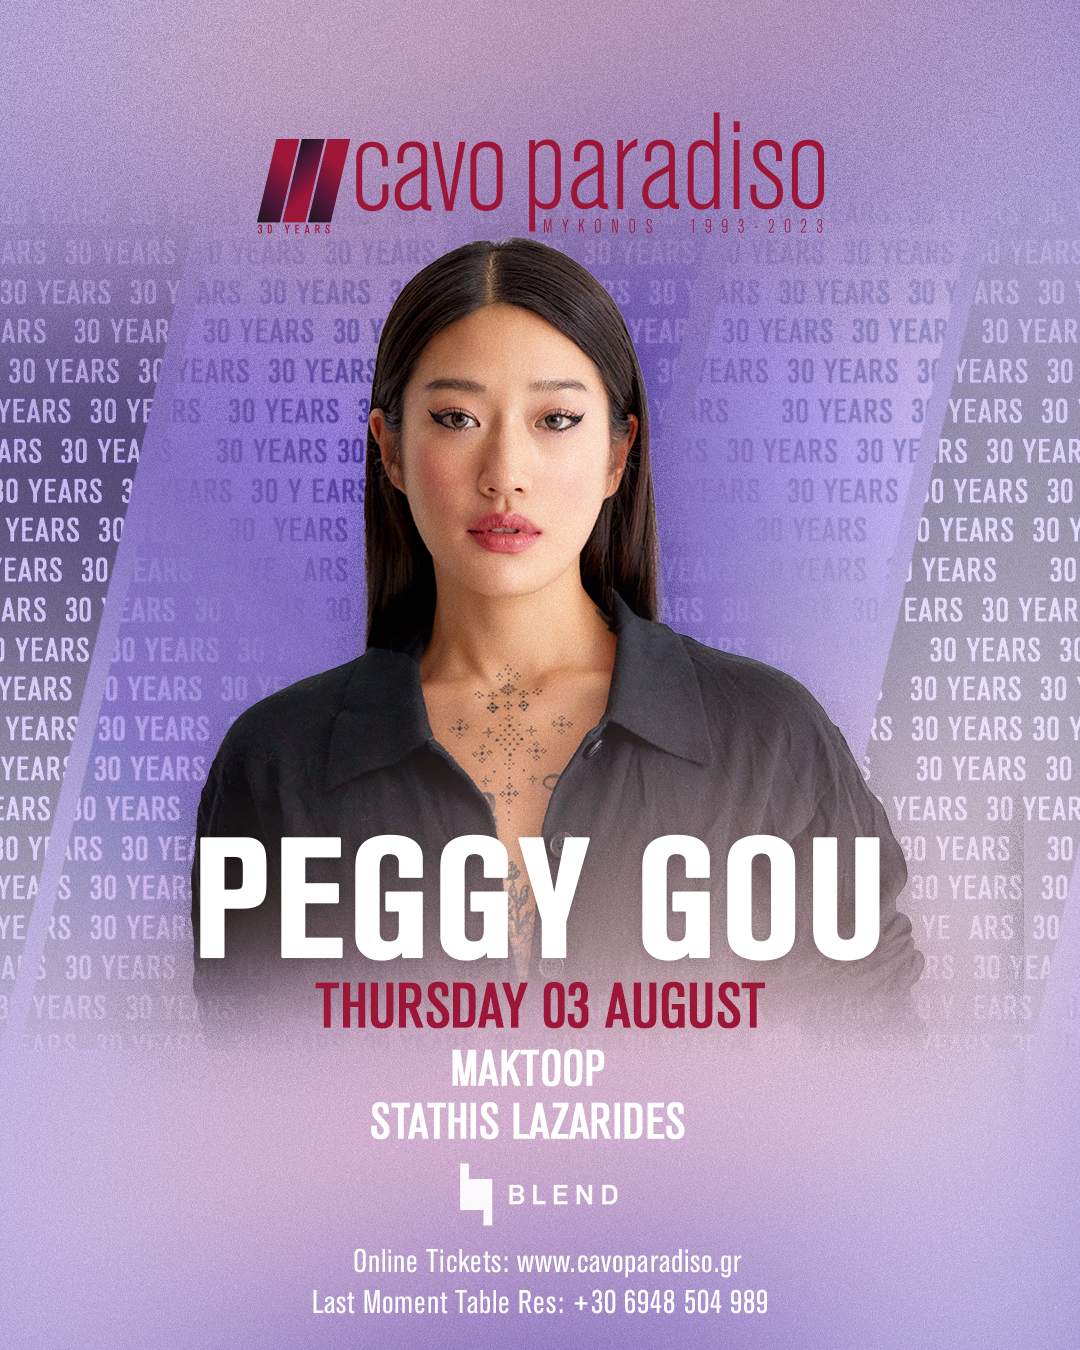 Blend with Peggy Gou at Cavo Paradiso, Greece